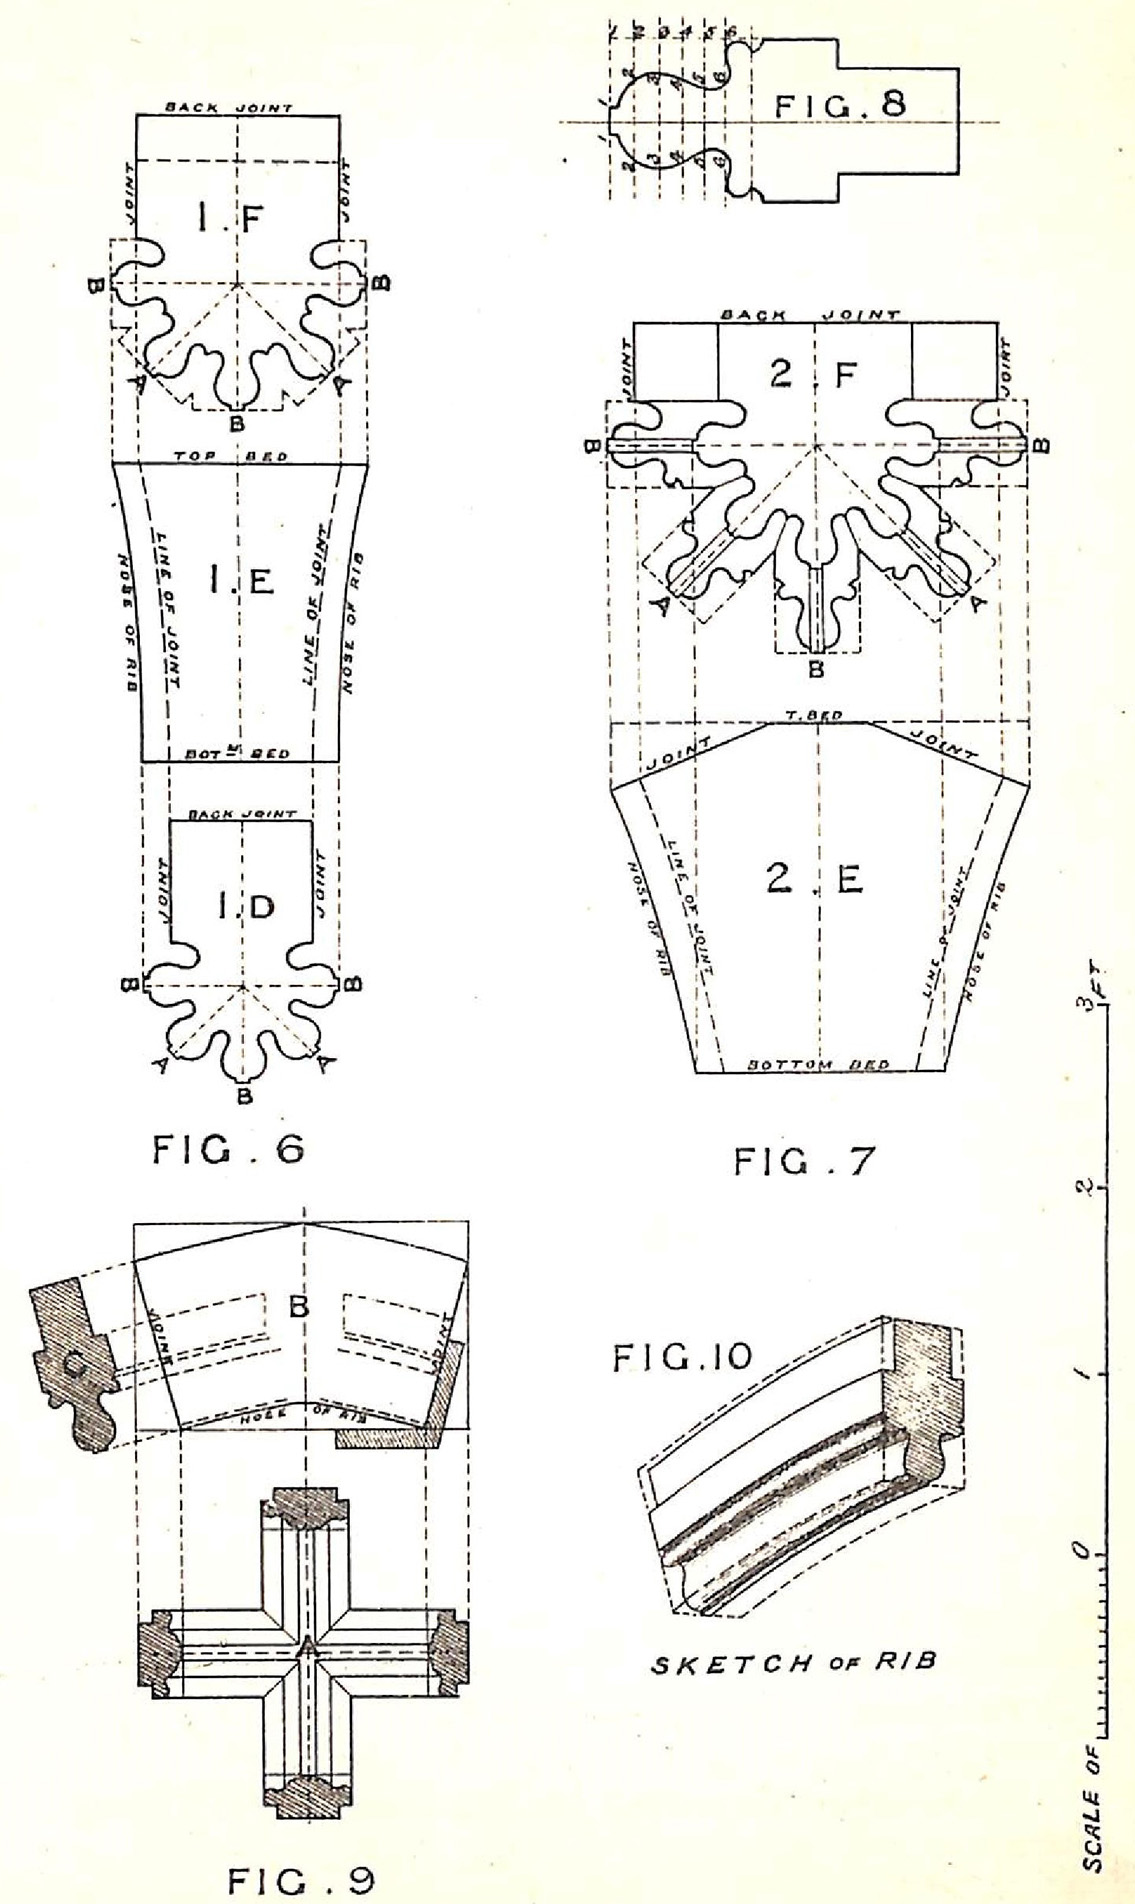 Plan of Joints